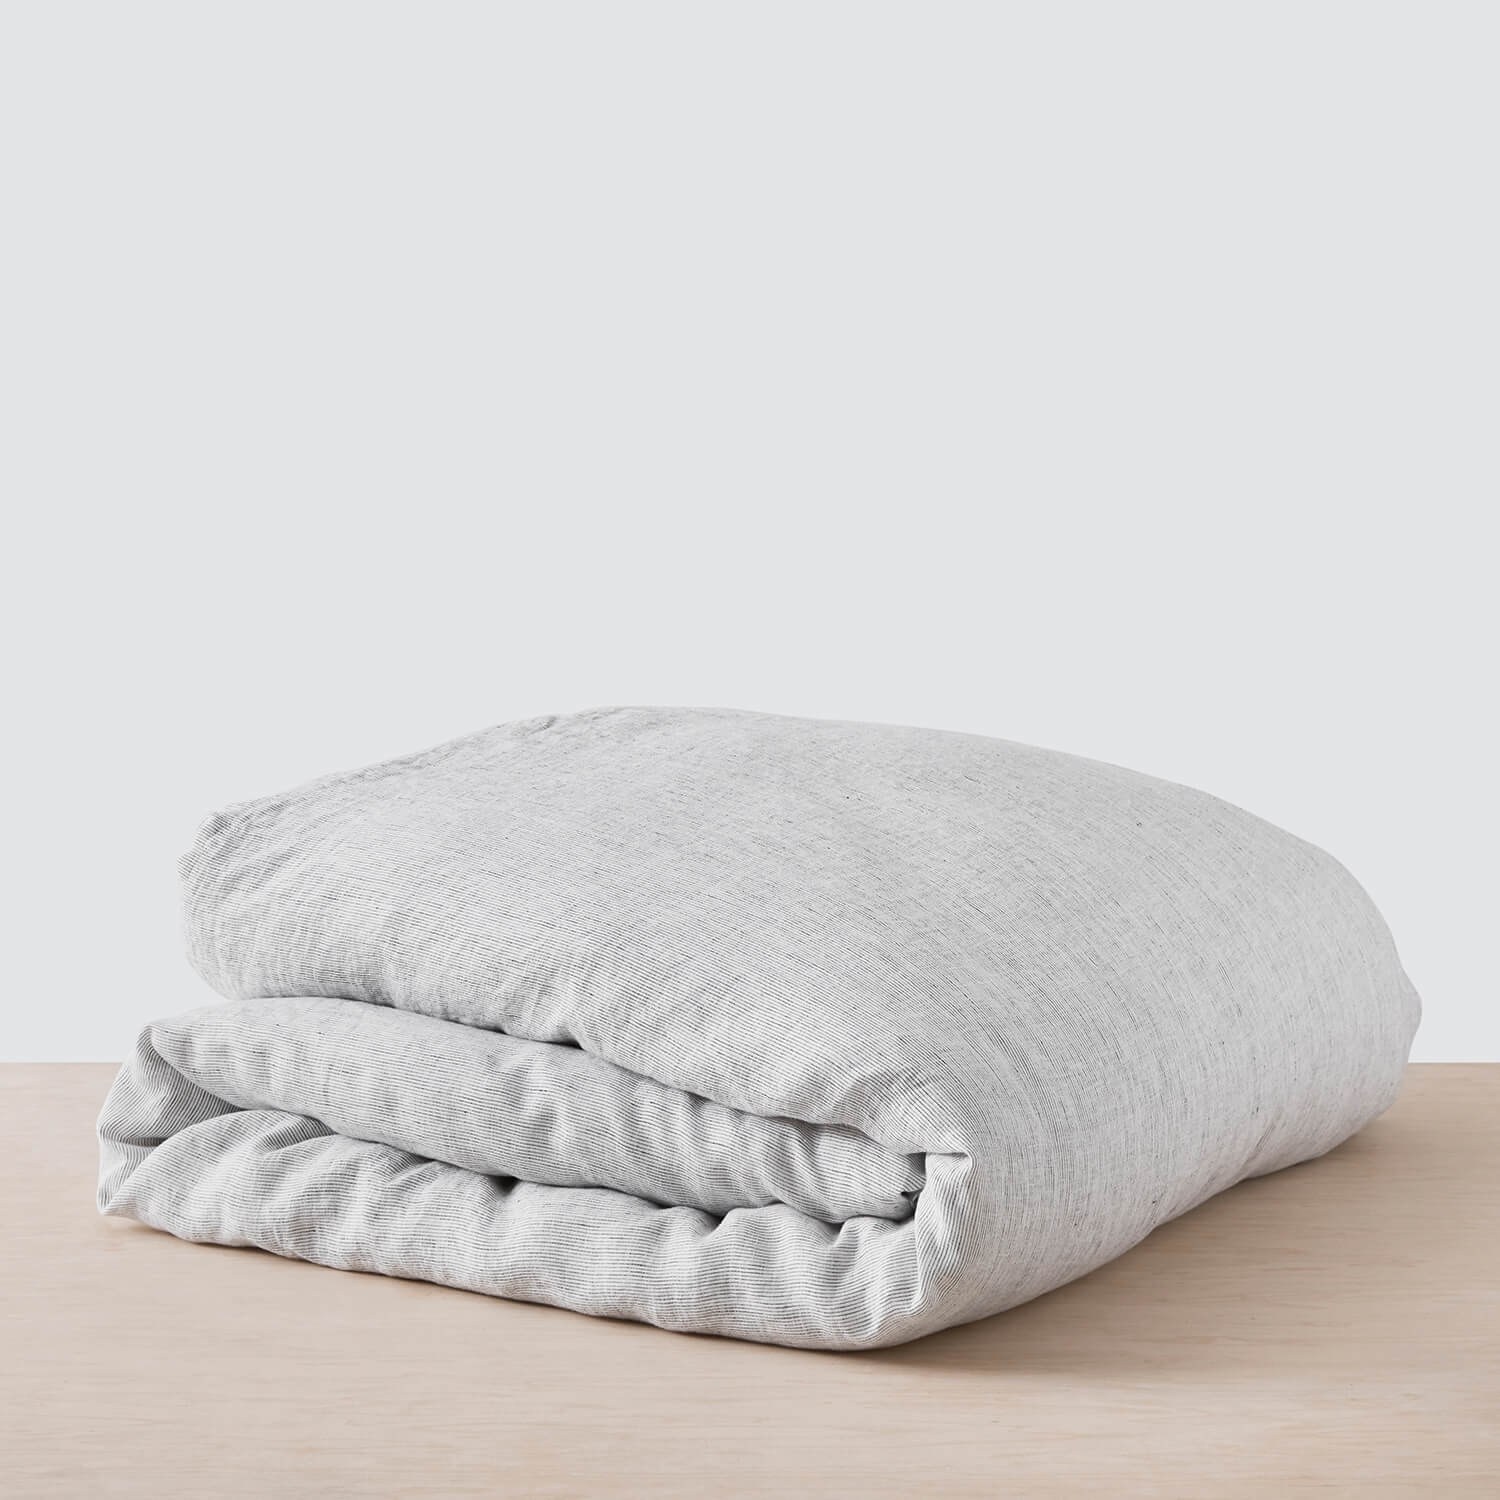 The Citizenry Stonewashed Linen Duvet Cover | Full/Queen | Duvet Only | Sienna - Image 2